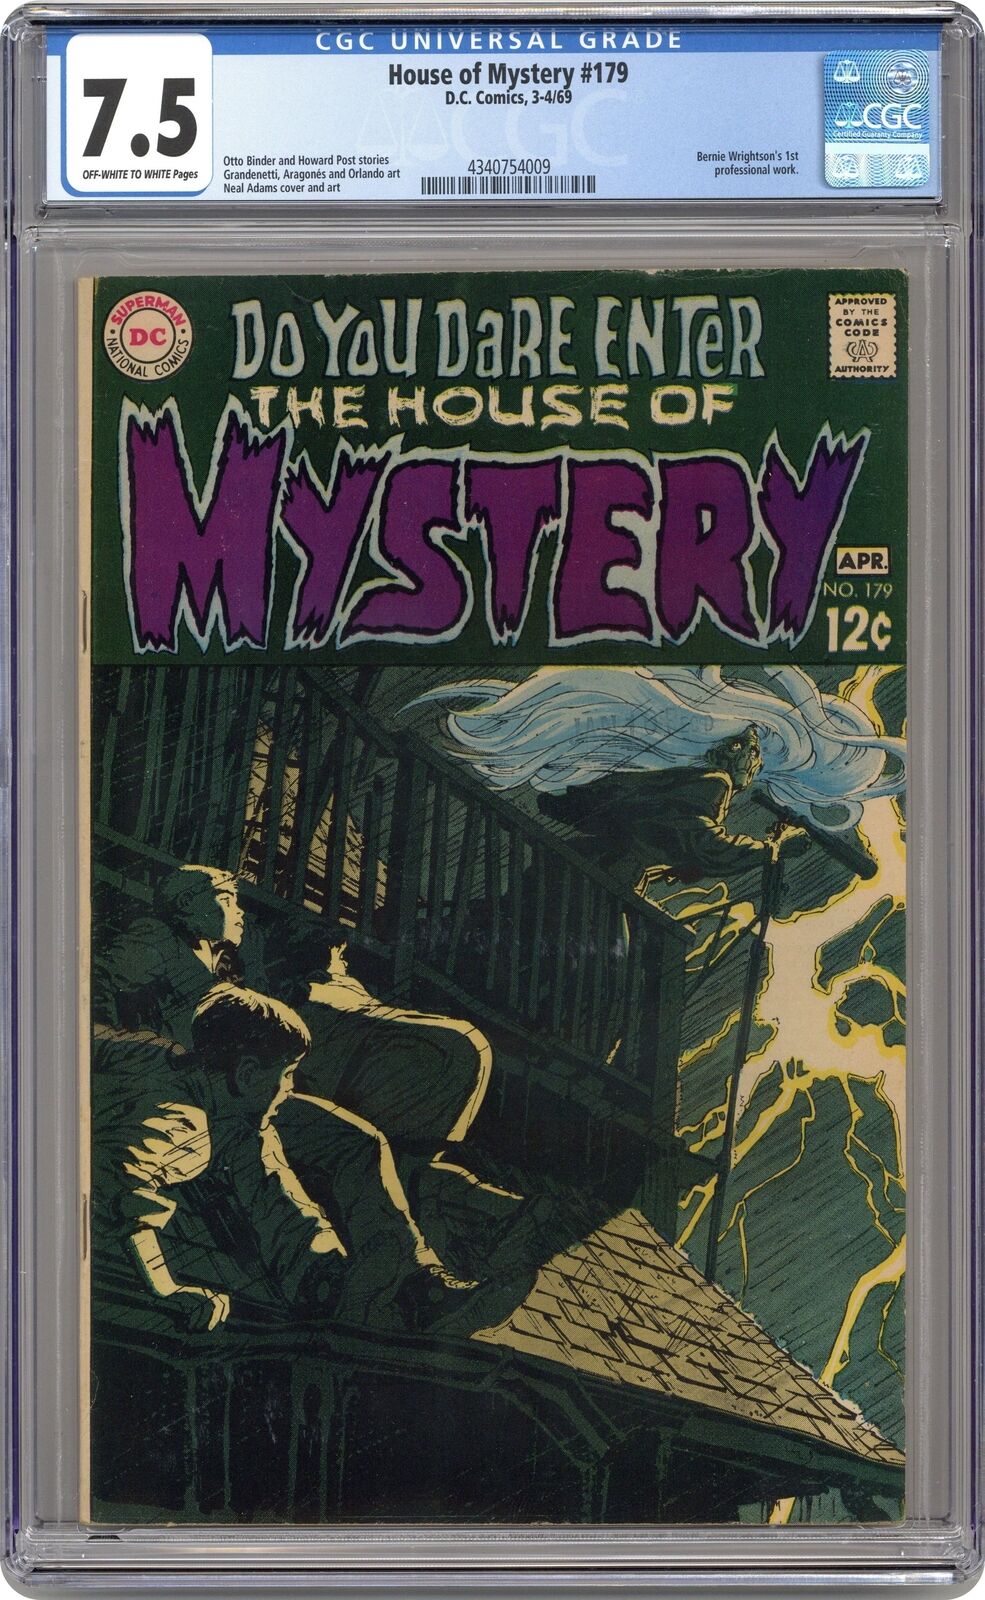 House of Mystery #179 CGC 7.5 1969 4340754009